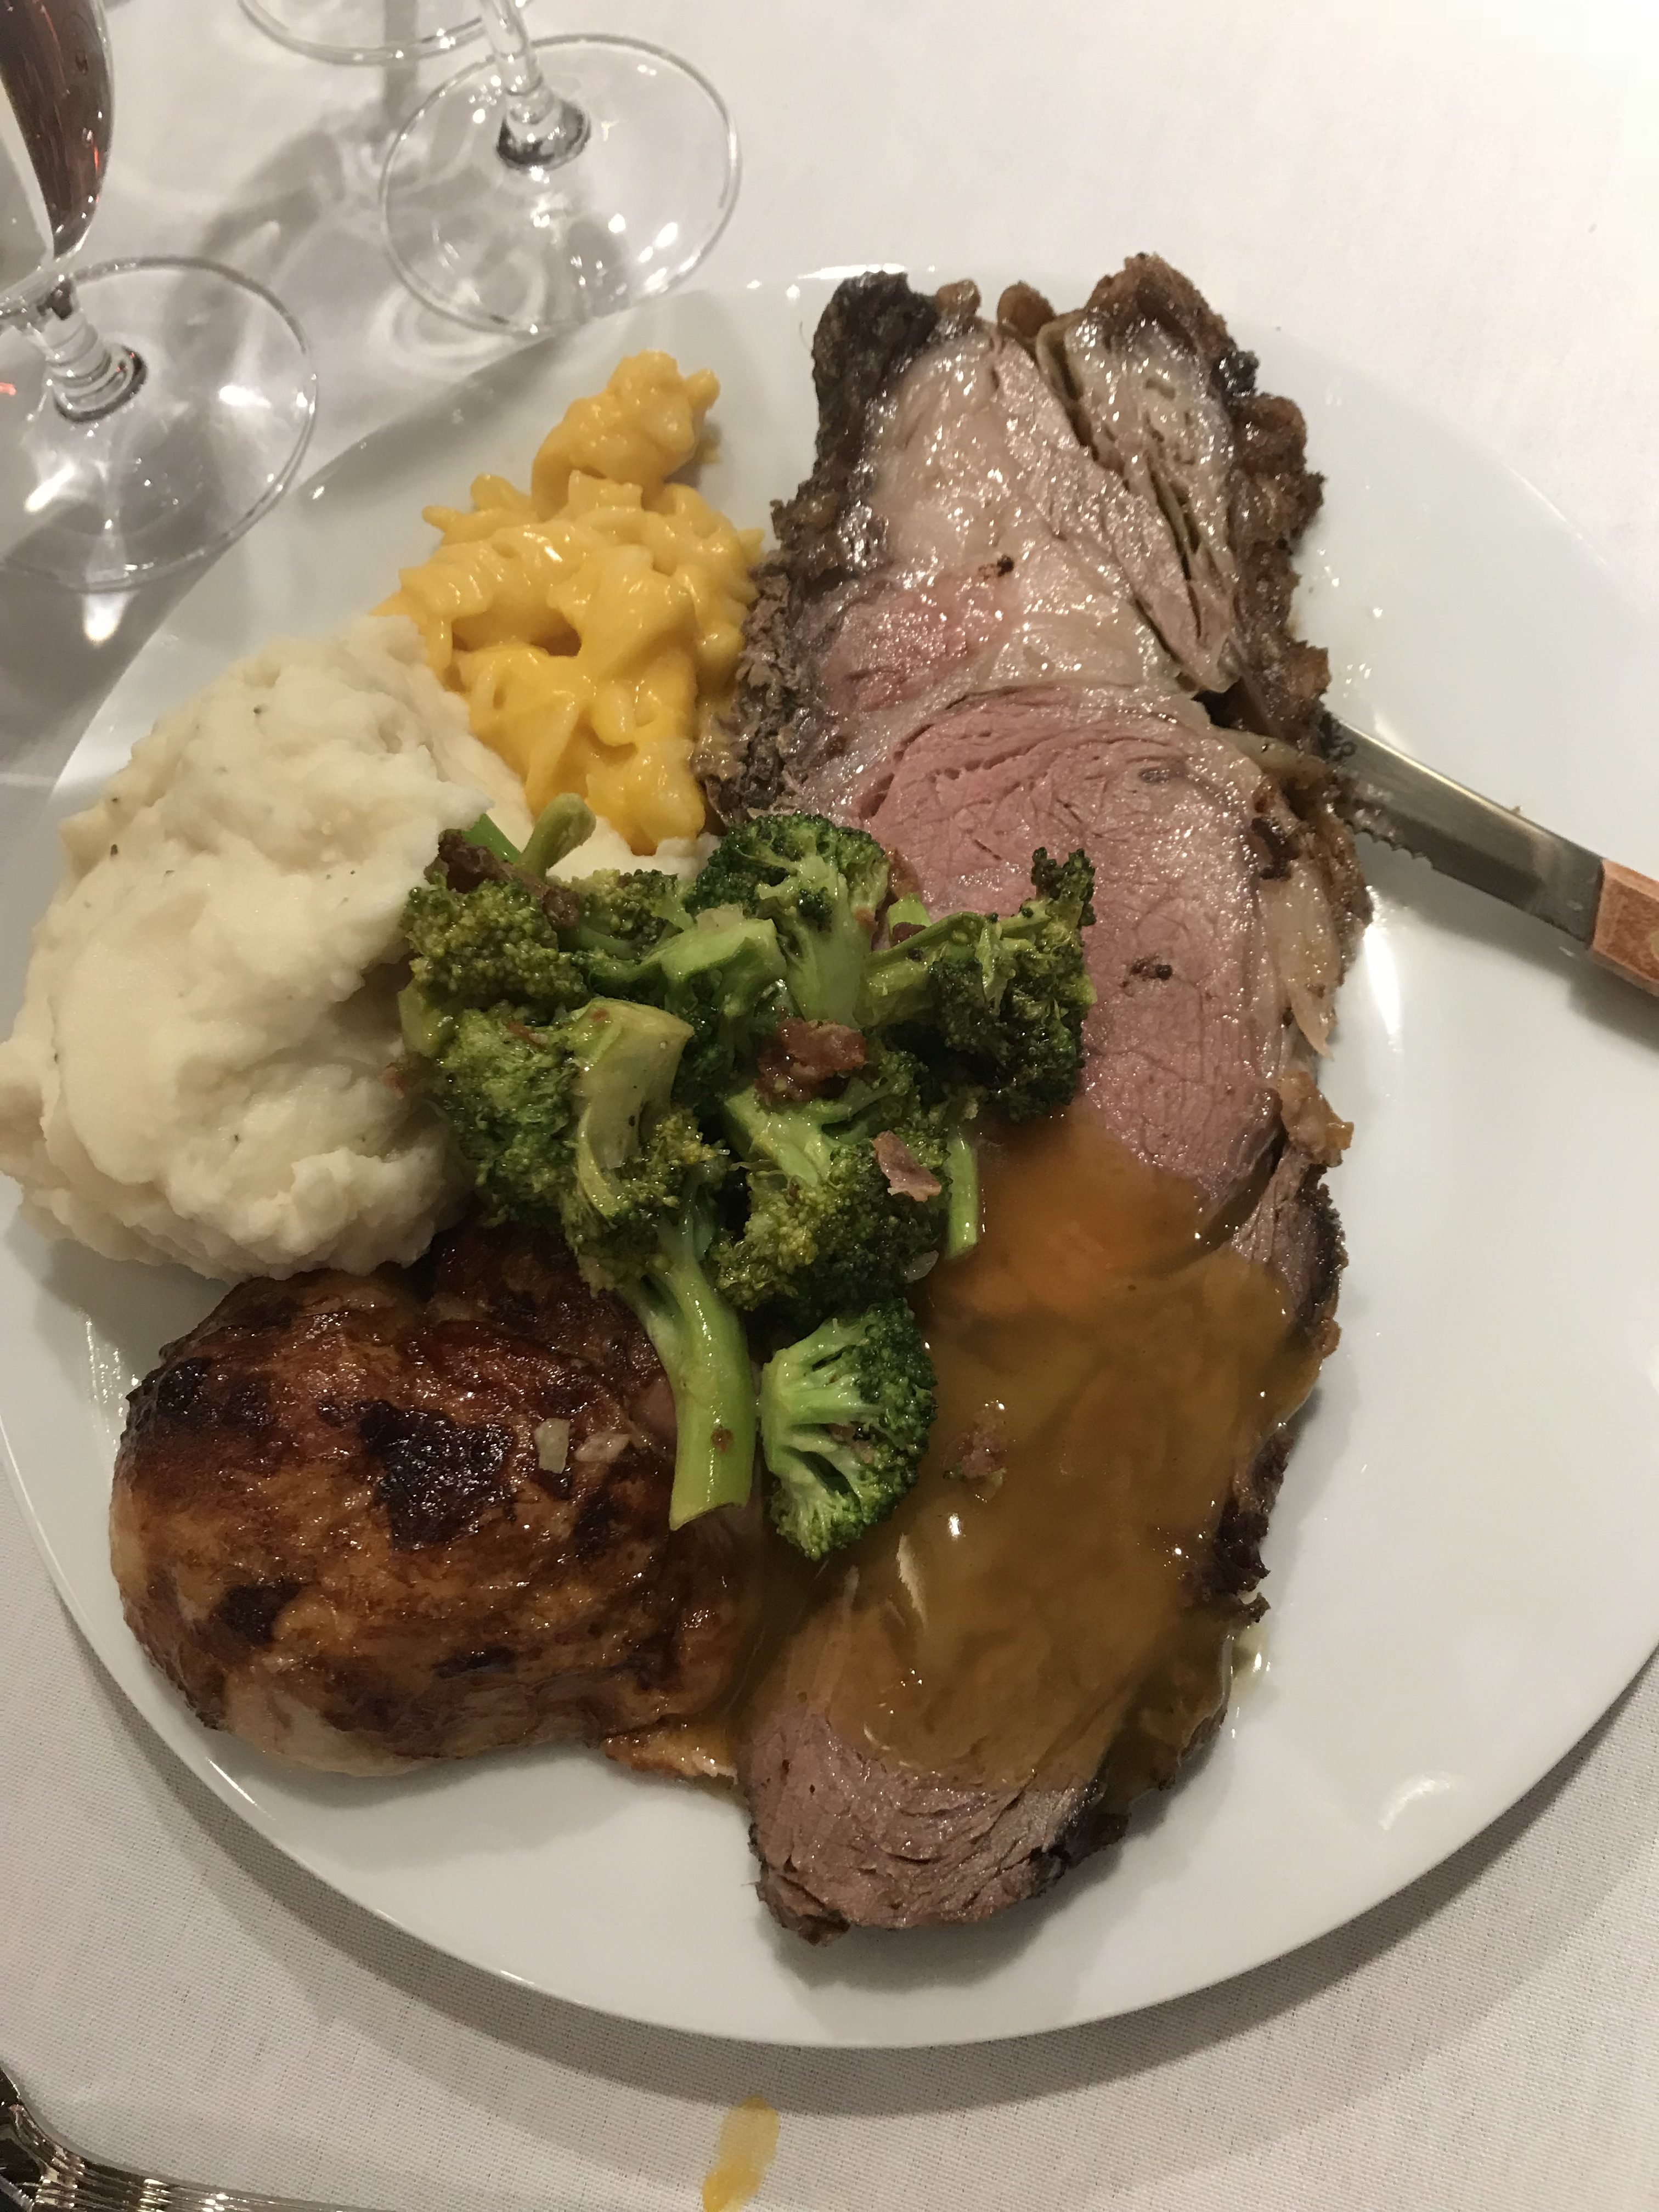 Join Me For A Delicious Prime Rib Dinner At Boston Market ...